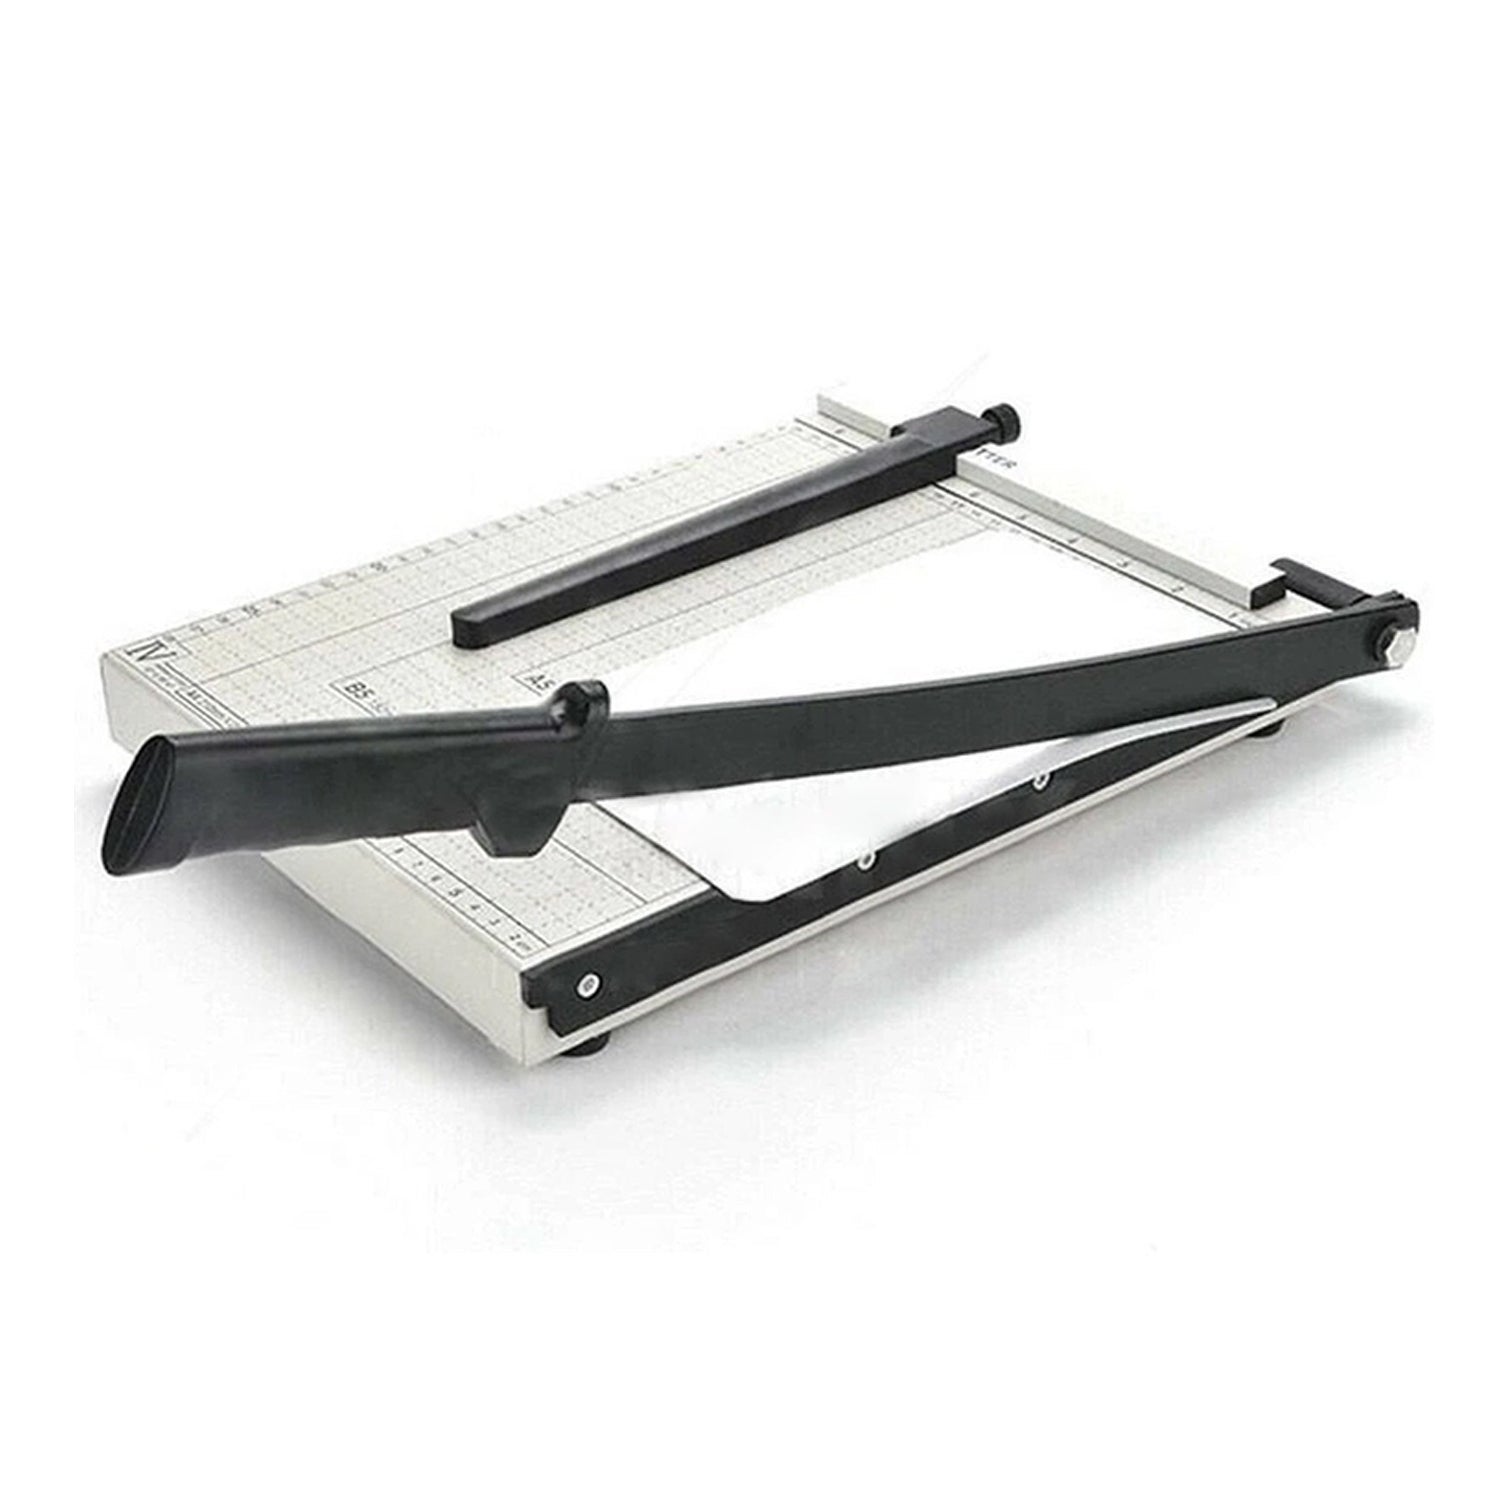 Guillotine Page Trimmer Paper Cutter - Size A4 To B7